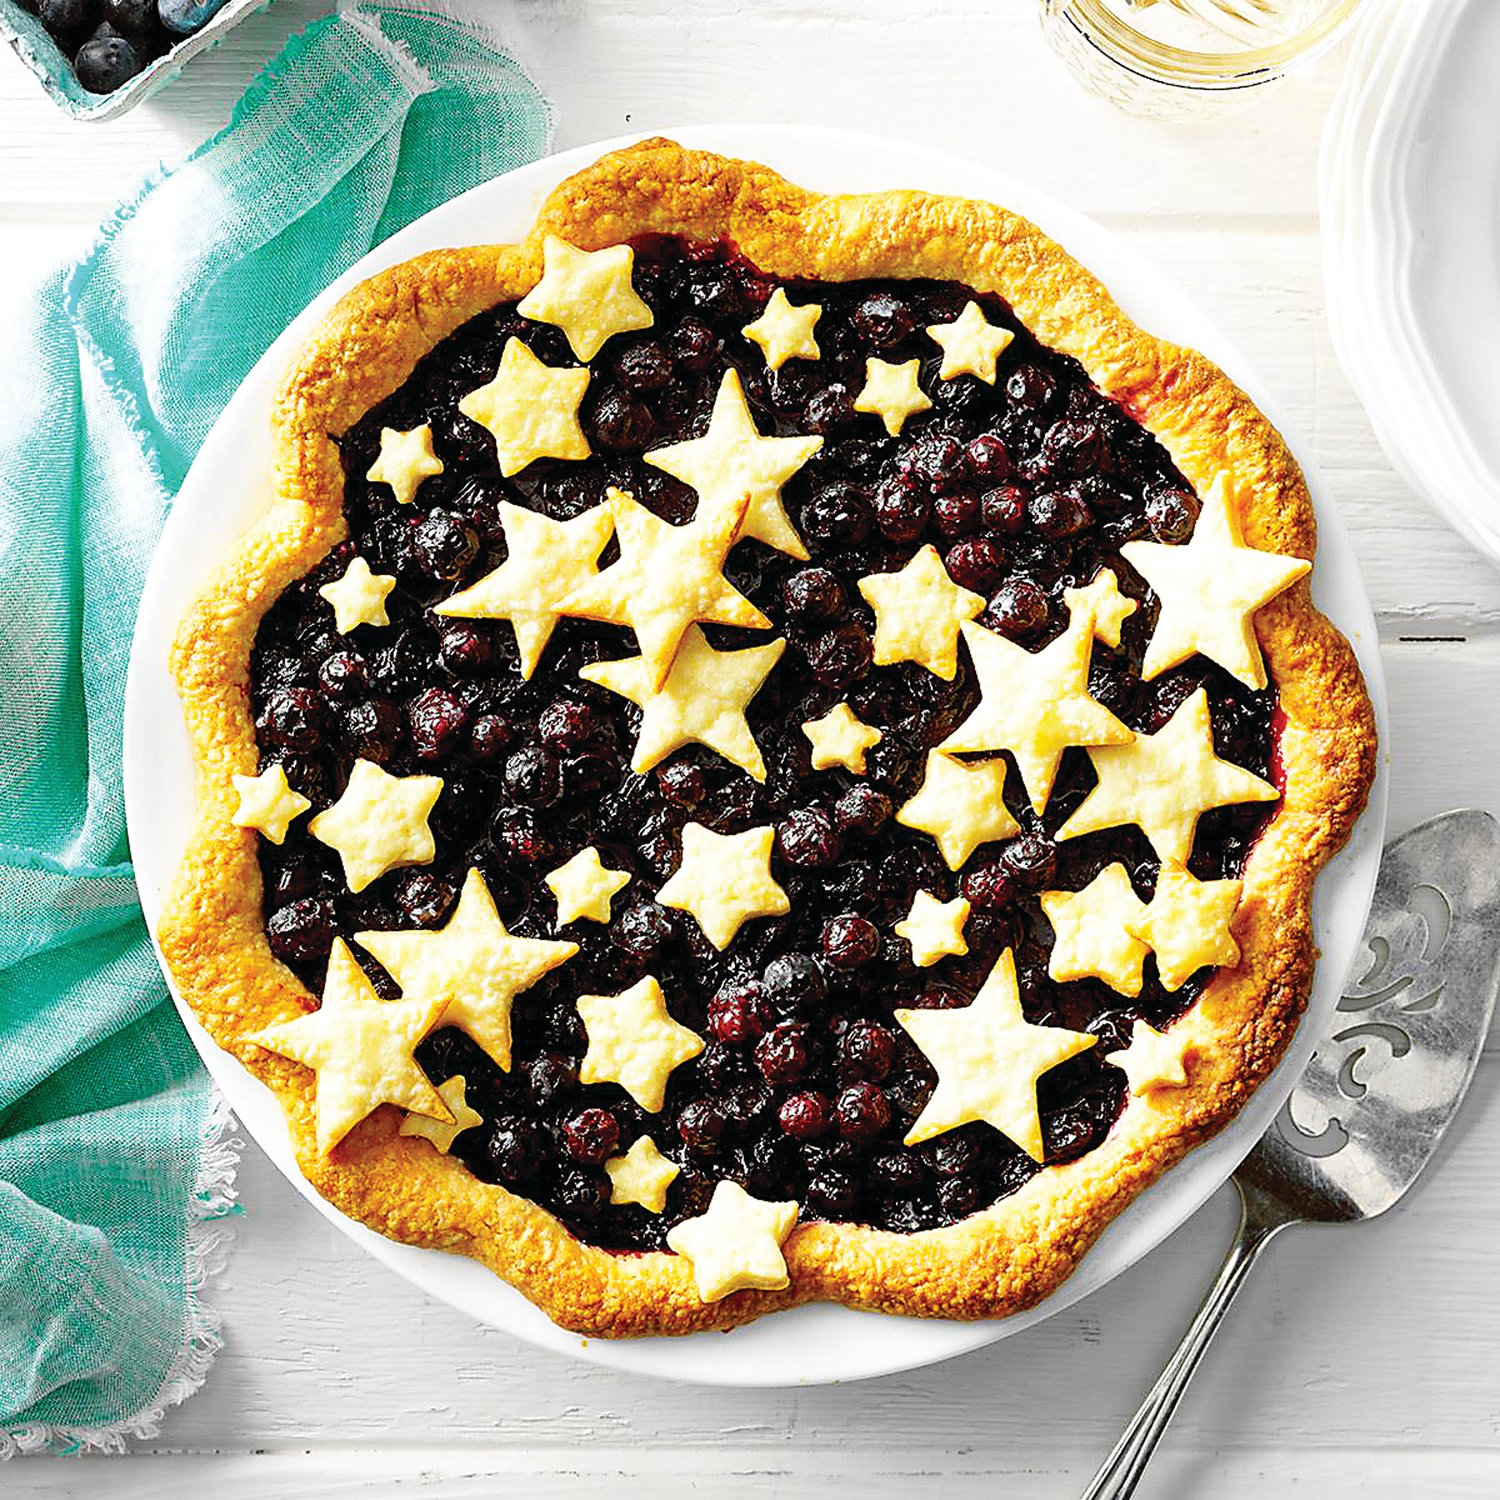 This star-spangled blueberry pie made using locally grown fruit is perfect for the Fourth of July.